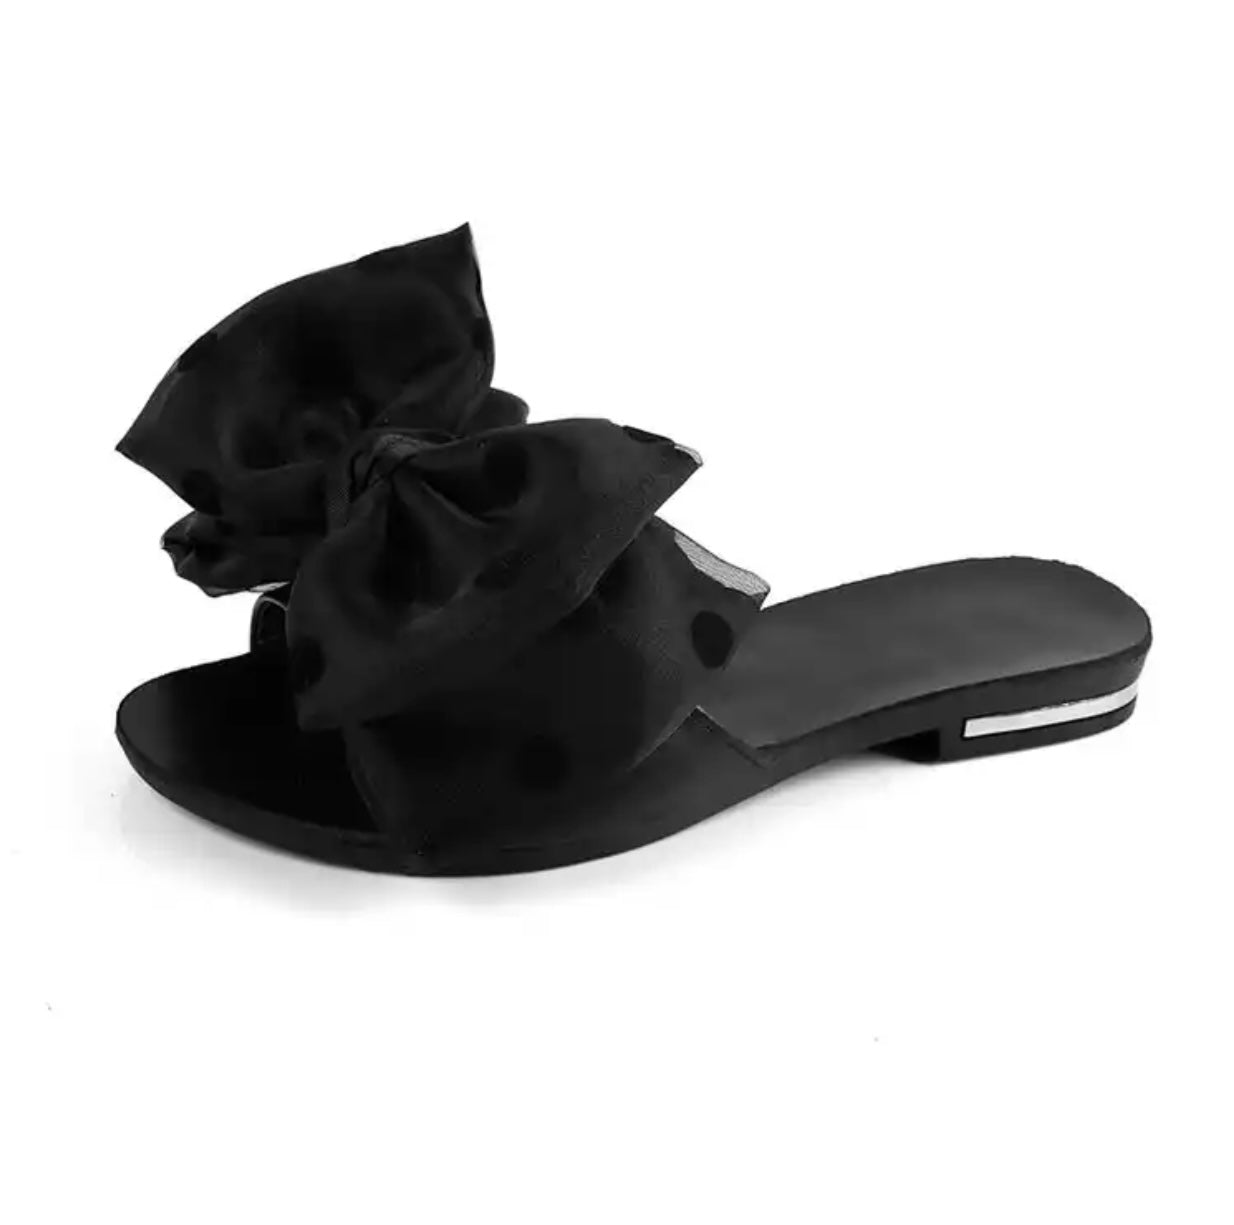 The Bow Tie Sandals (Comes In Different Colors) Preorder Ships 5/20 - Seasonal Secrets